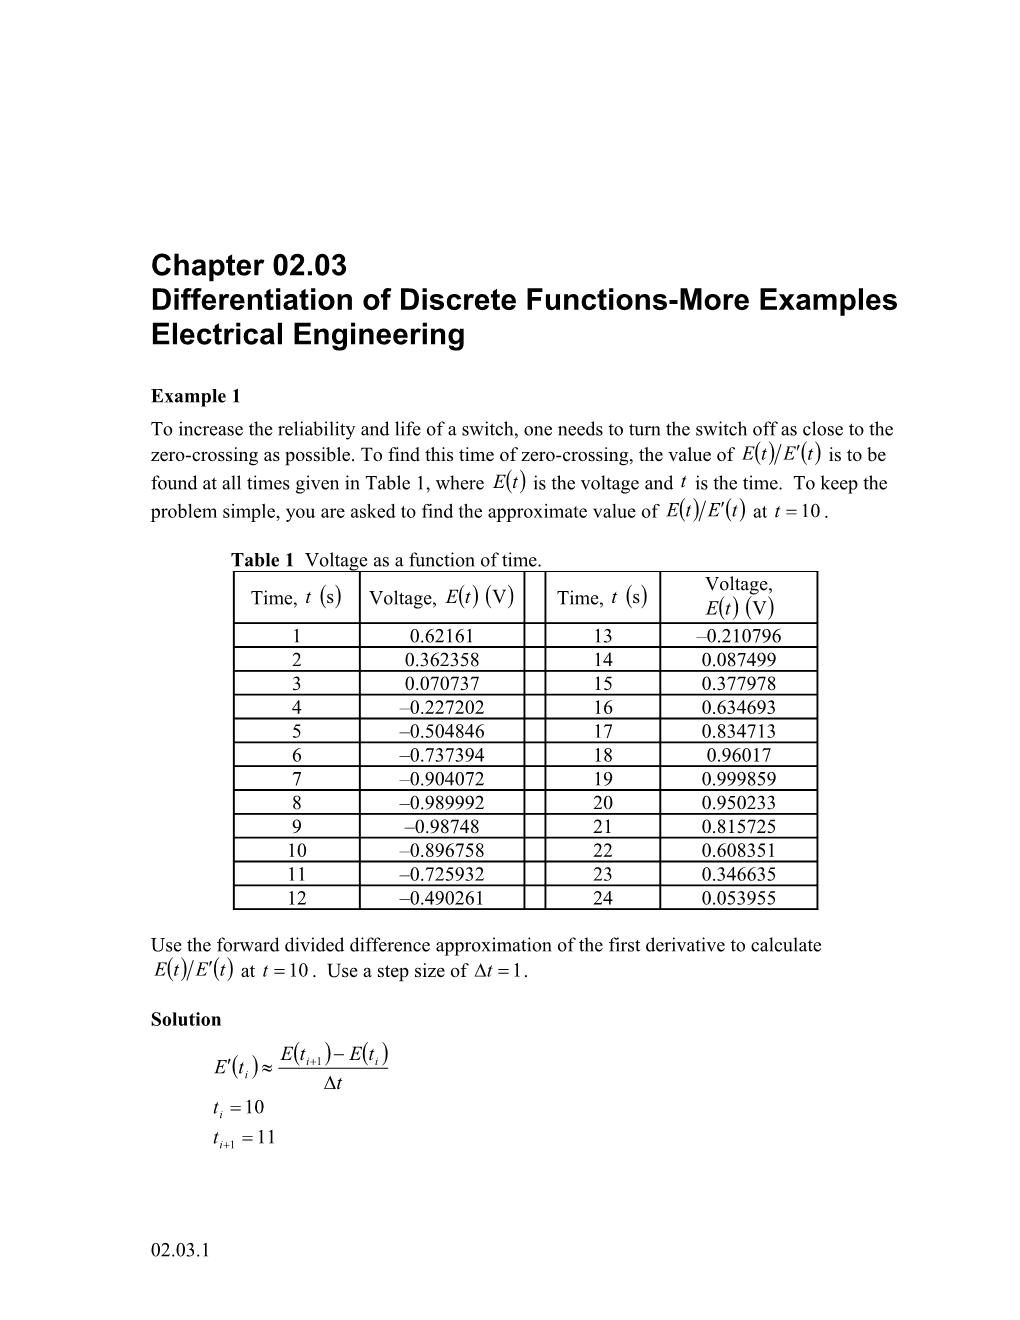 Differentiation of Discrete Functions-More Examples: Electrical Engineering